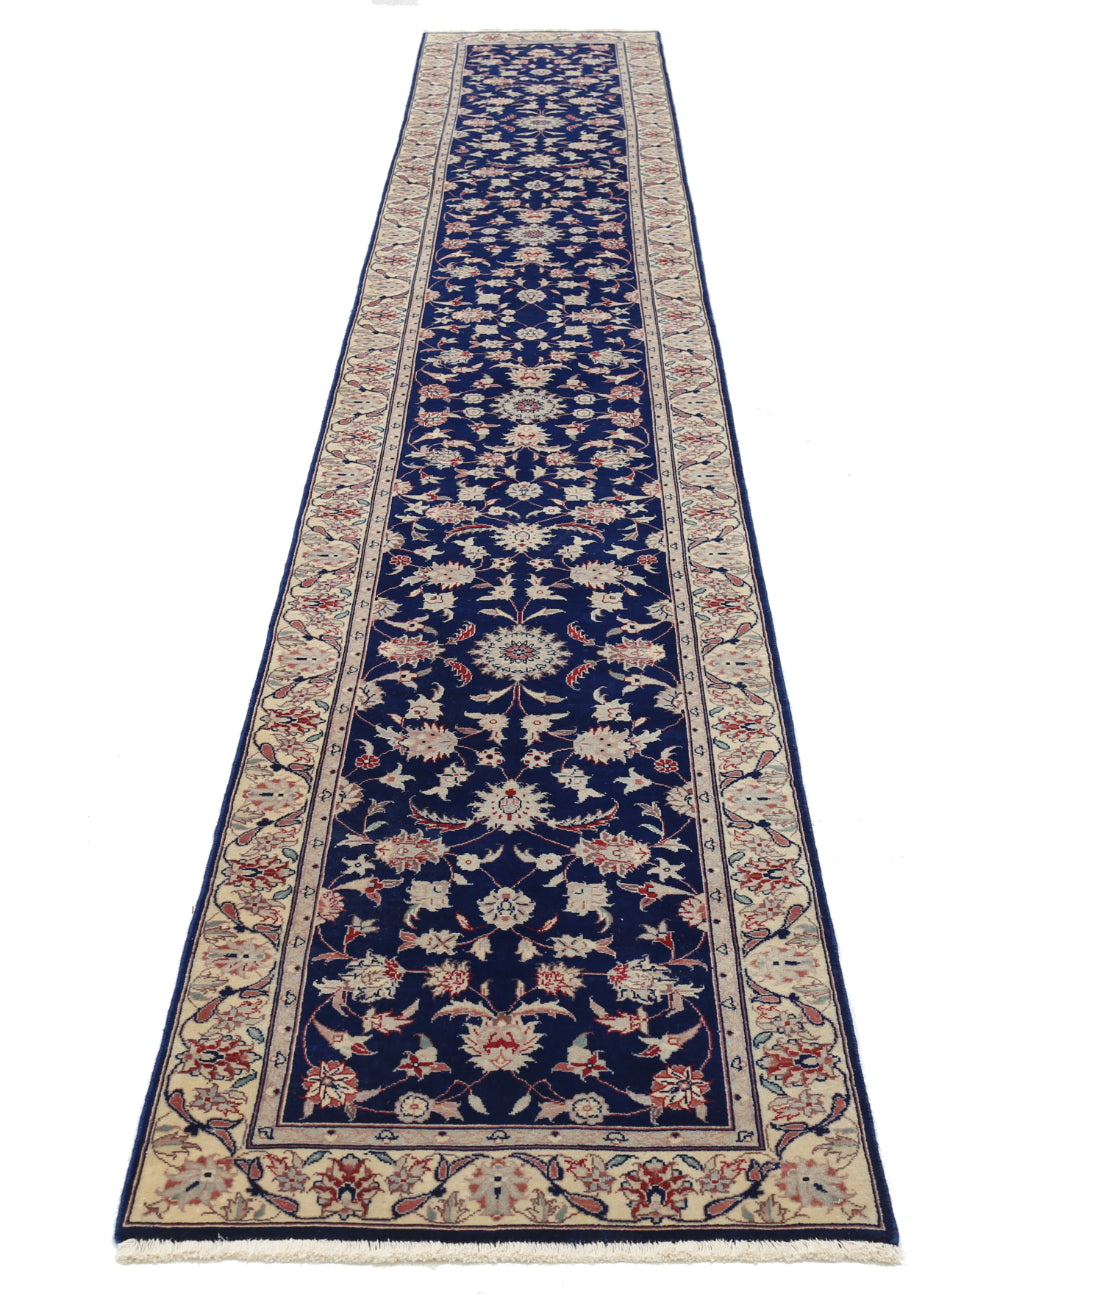 Heritage 2' 5" X 15' 9" Hand-Knotted Wool Rug 2' 5" X 15' 9" (74 X 480) / Blue / Ivory